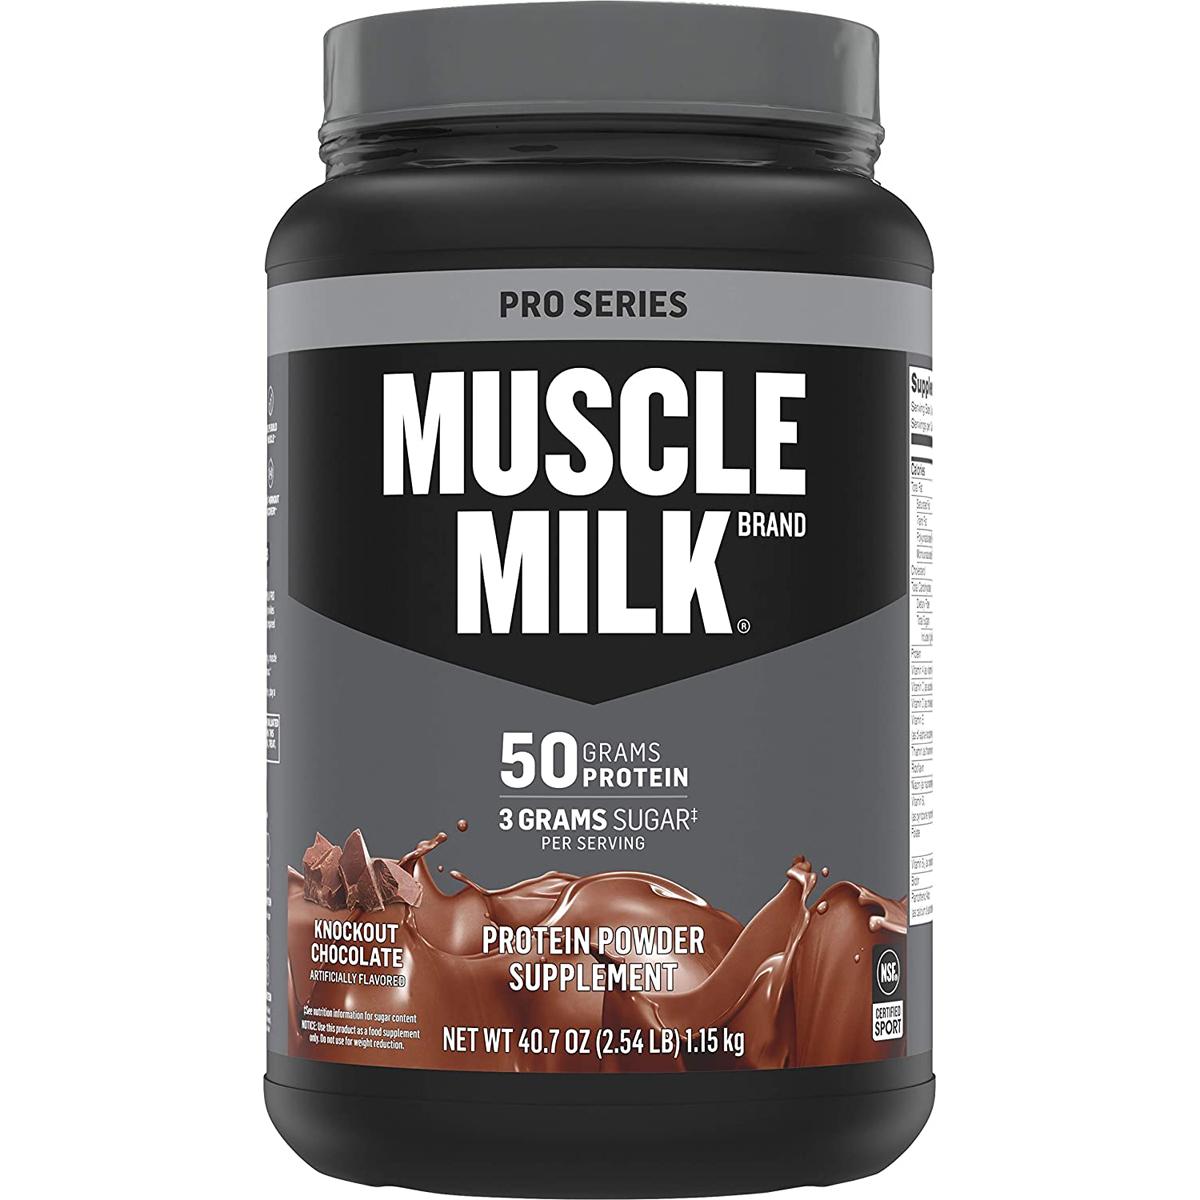 2.54Lb Muscle Milk Pro Series Protein Powder for $12.24 Shipped